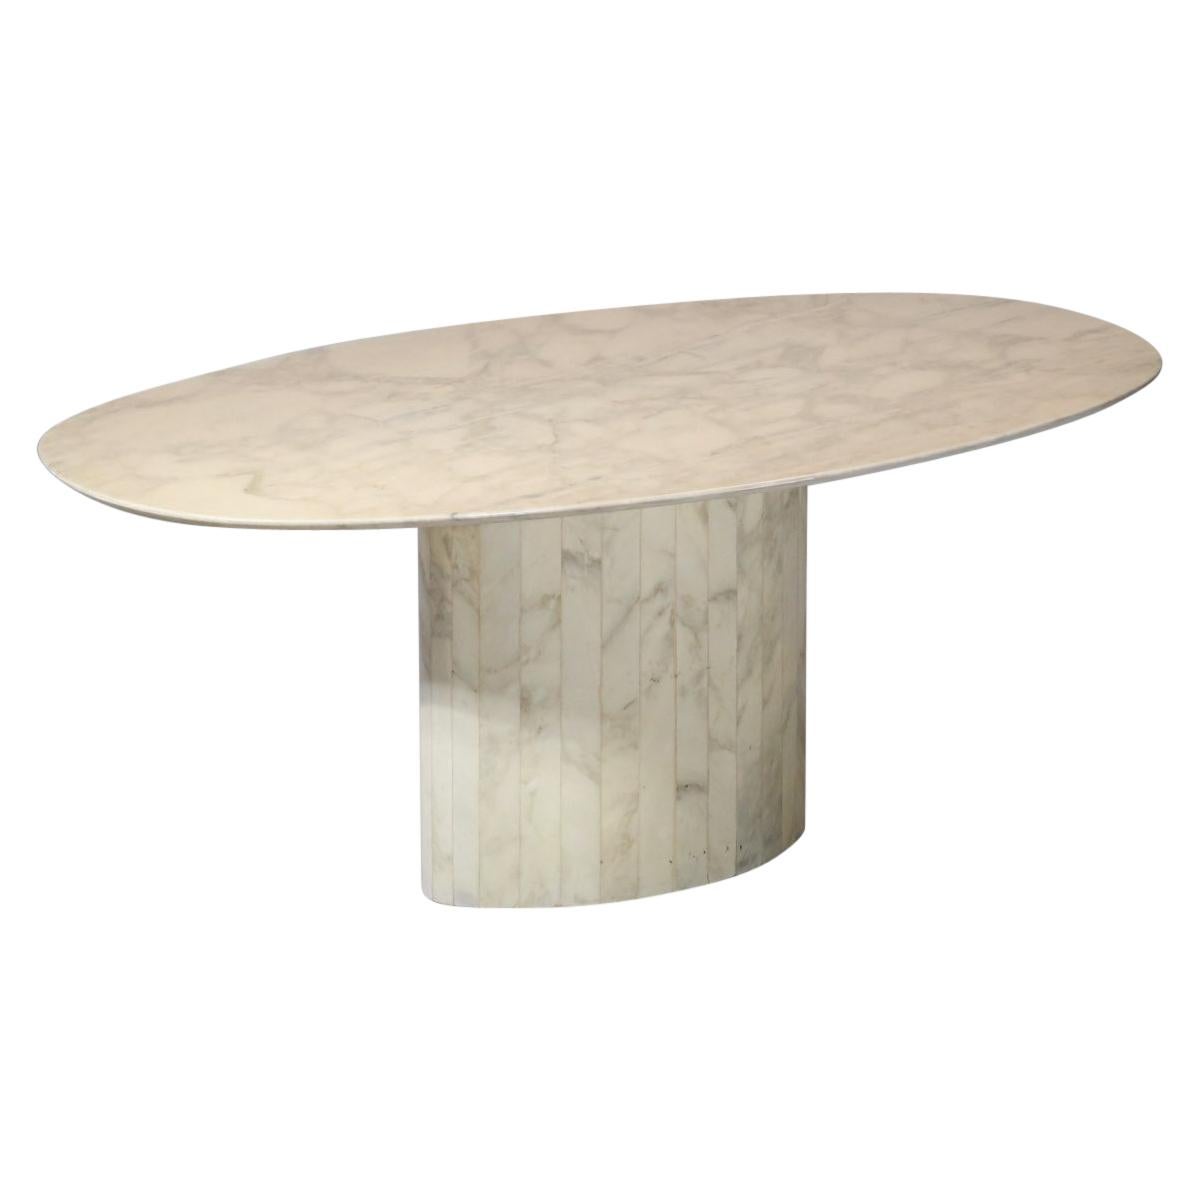 Oval Dining Table in Carrara Marble from the 1970s French Design